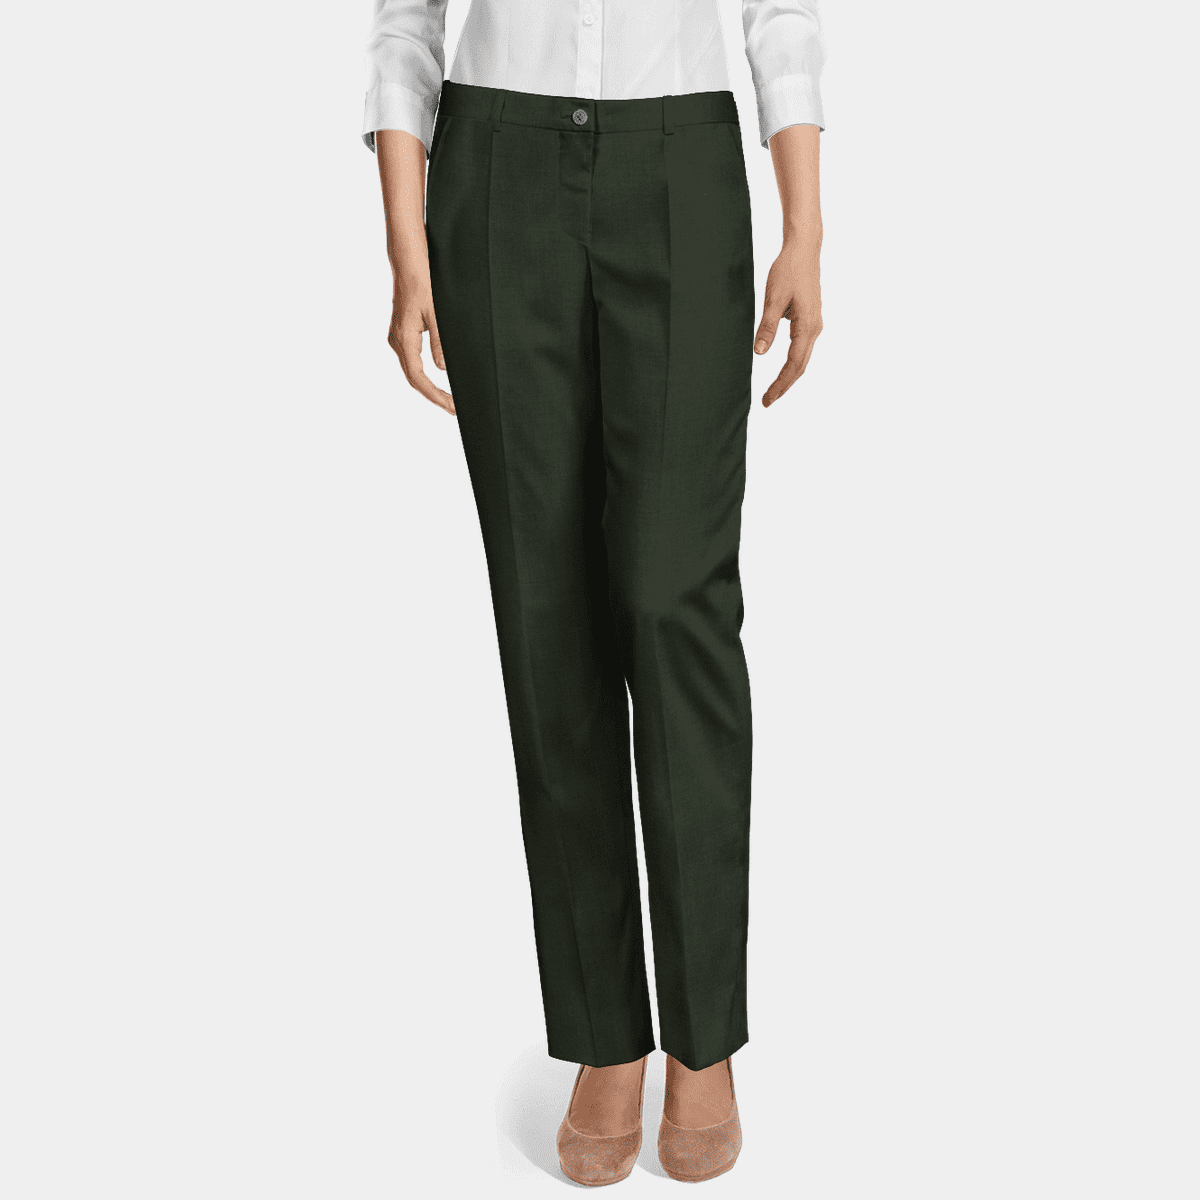 Plus Size Trousers for Women - Sumissura